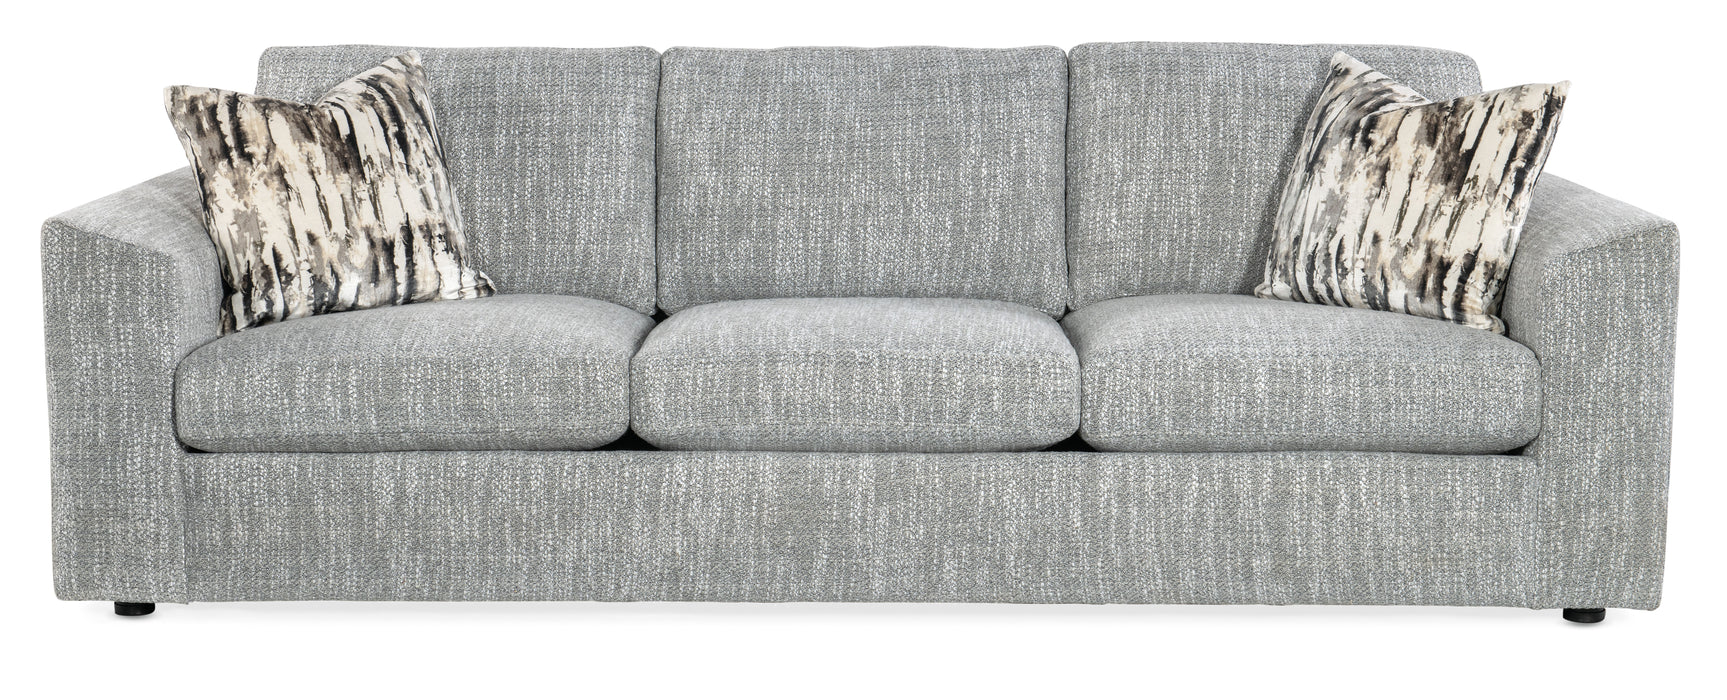 Midtown - Sofa 3 Over 3 - Pearl Silver